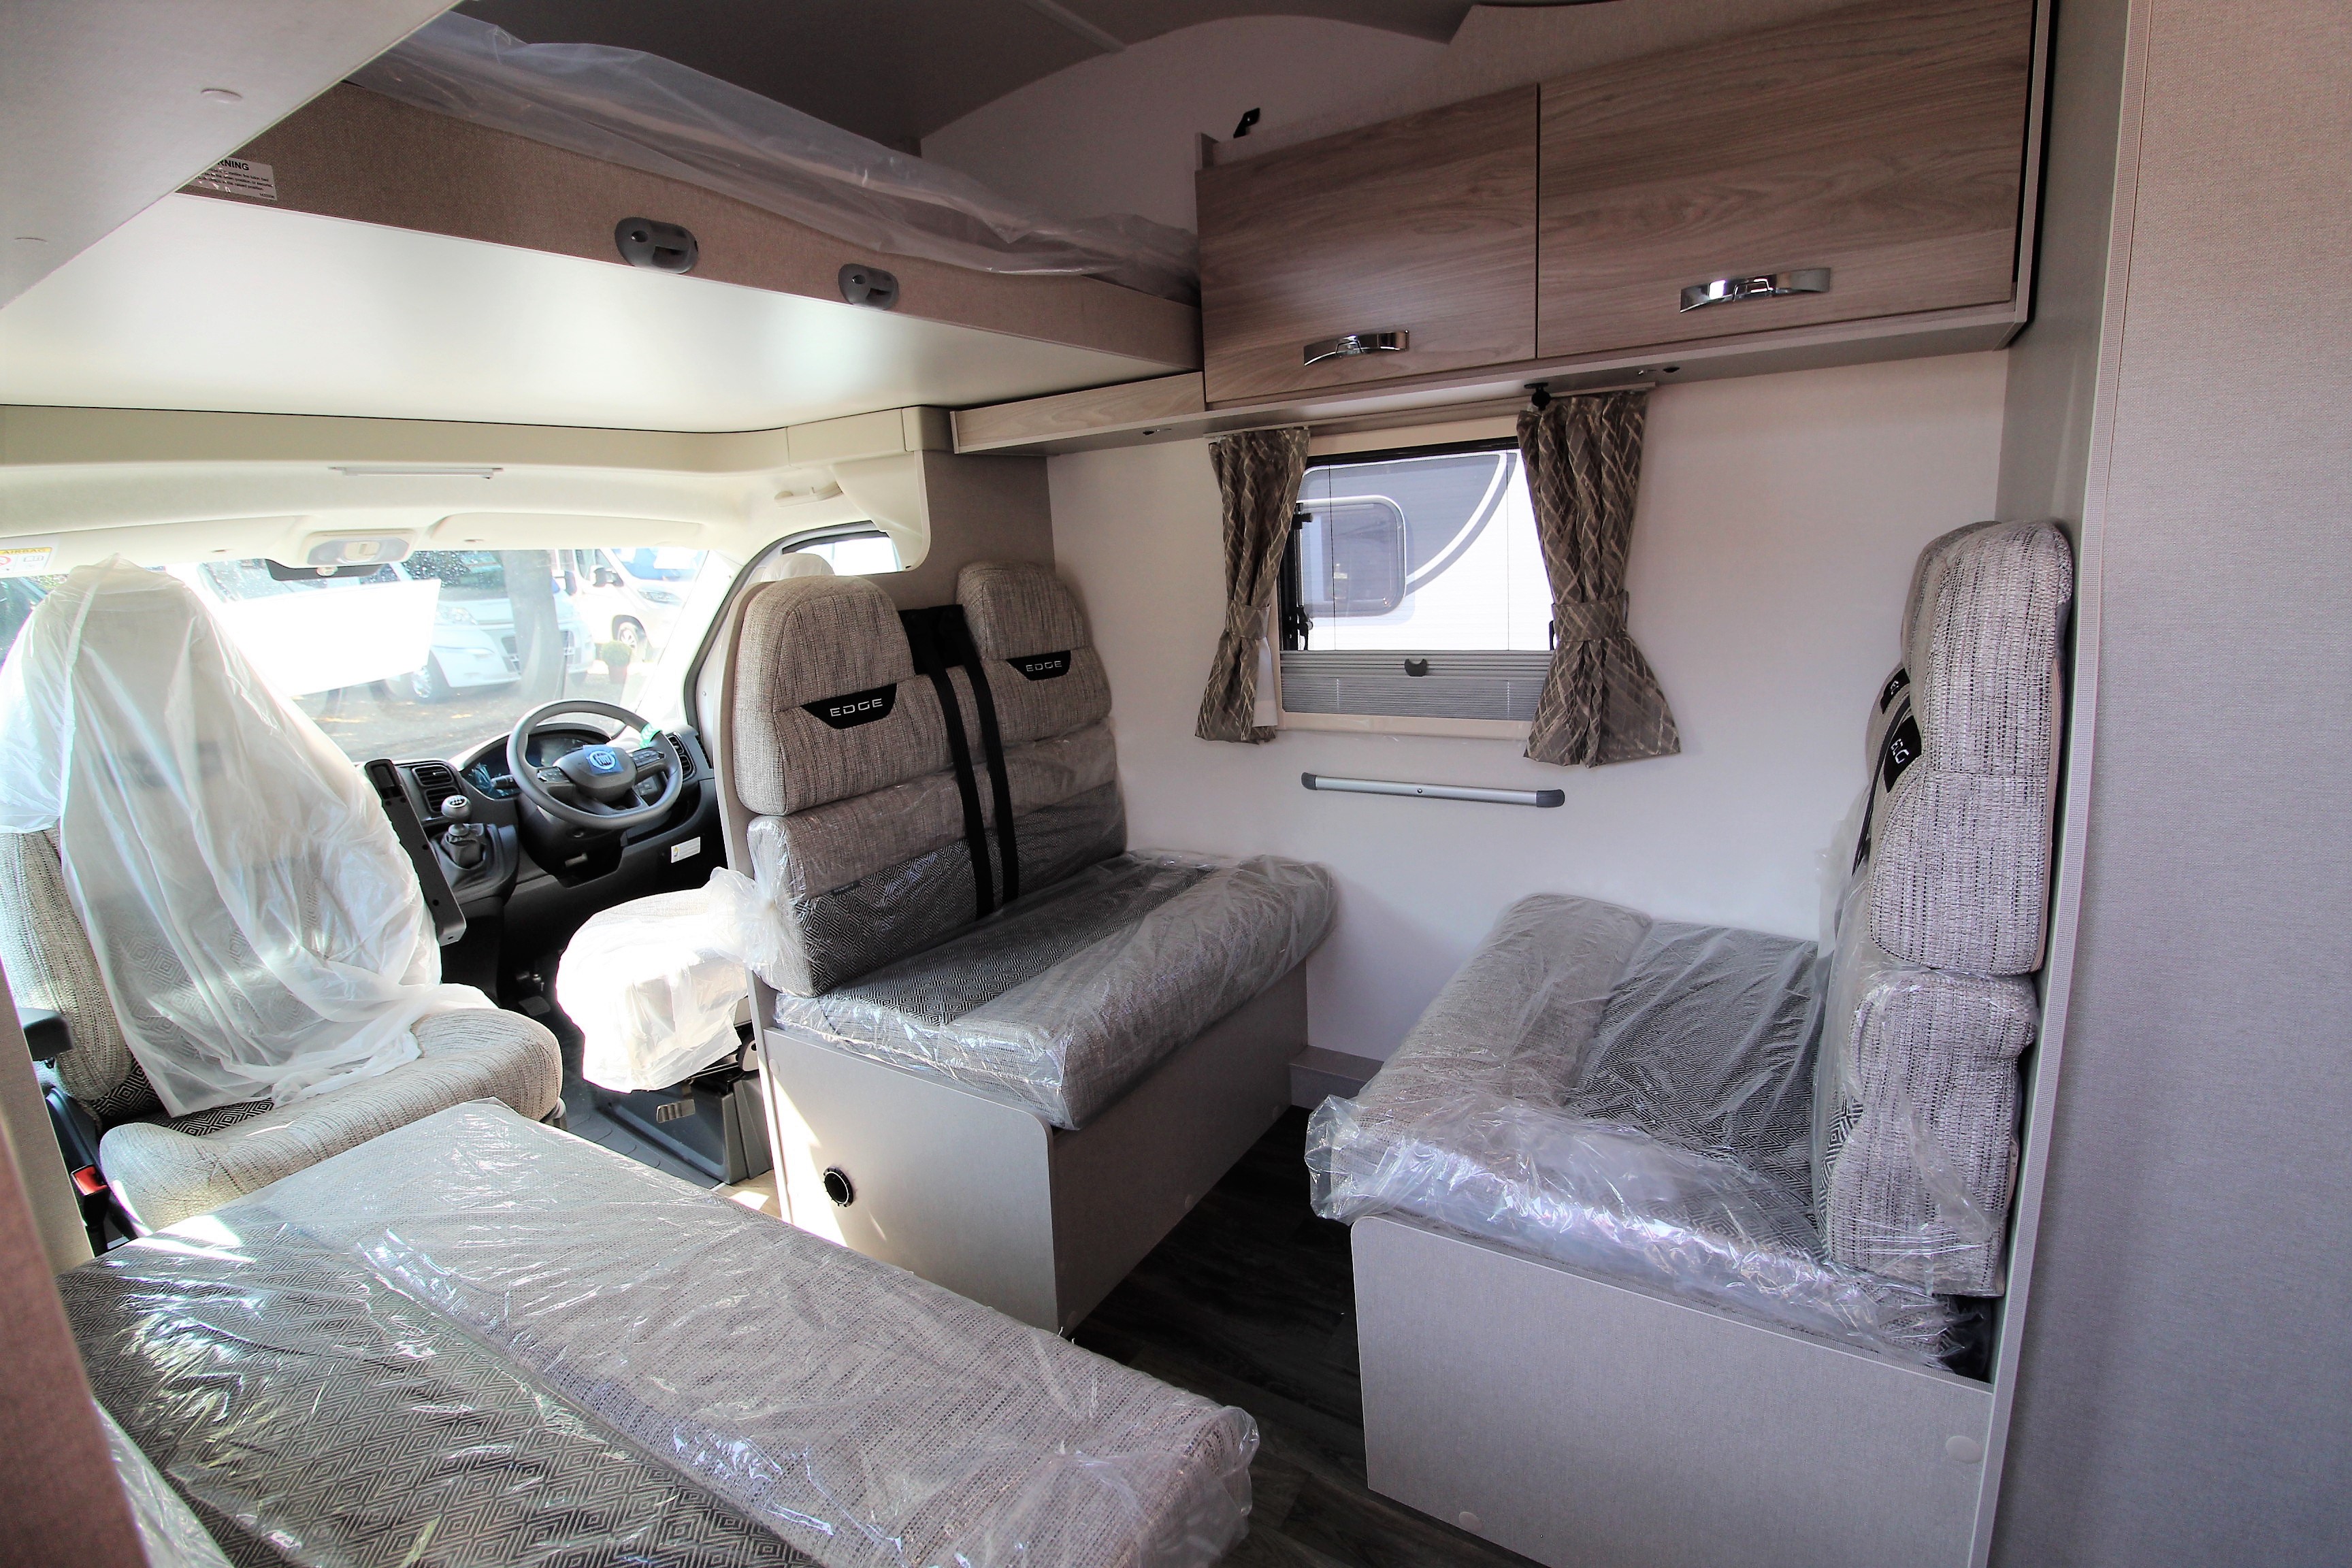 Can You Travel In The Back Of A Motorhome?